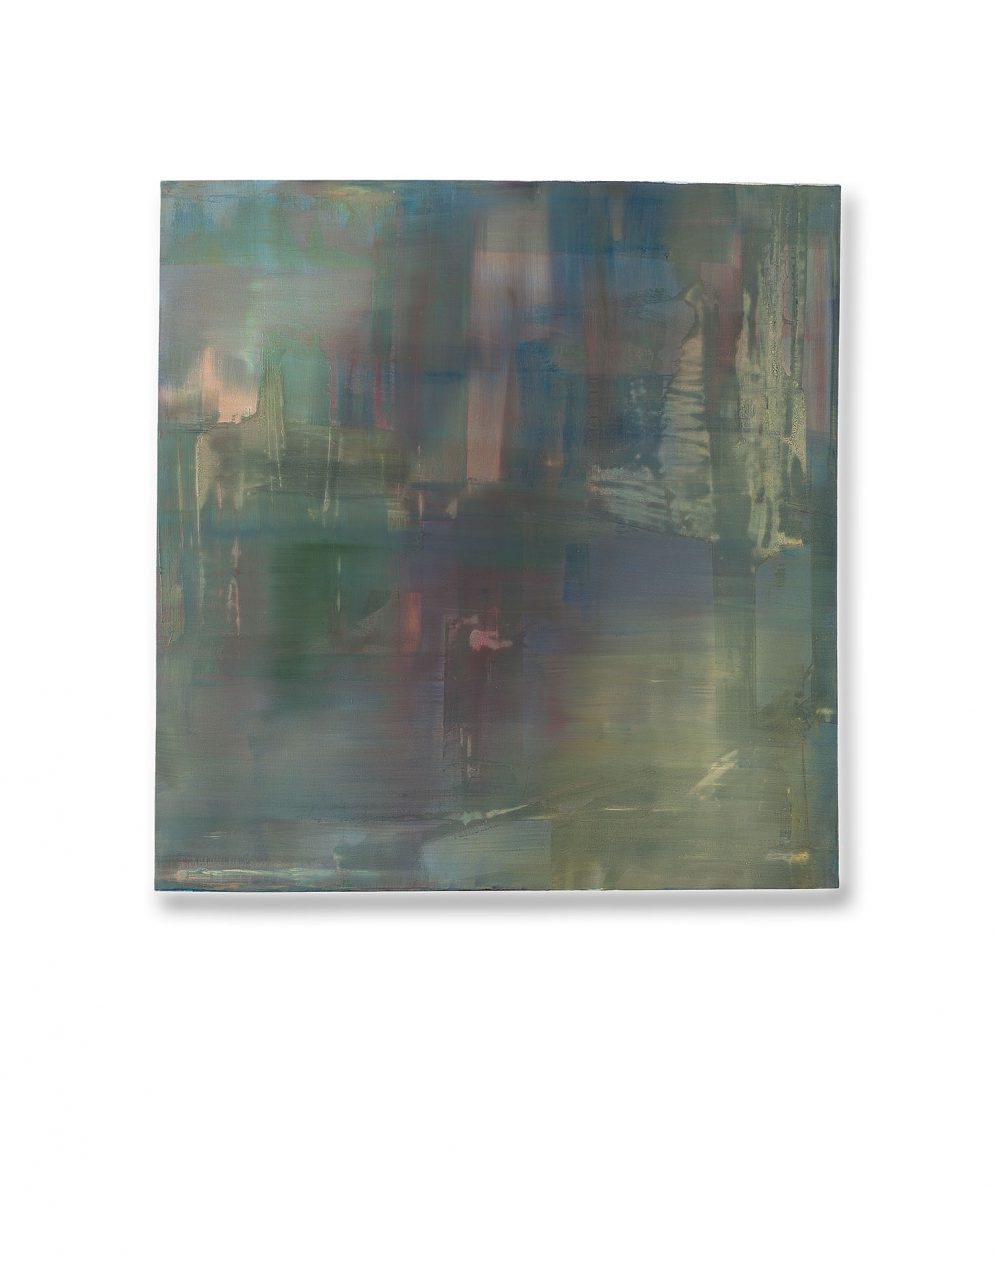 Untitled (climate state XXVII), 2004, Oil on canvas, 118 x 123 cm